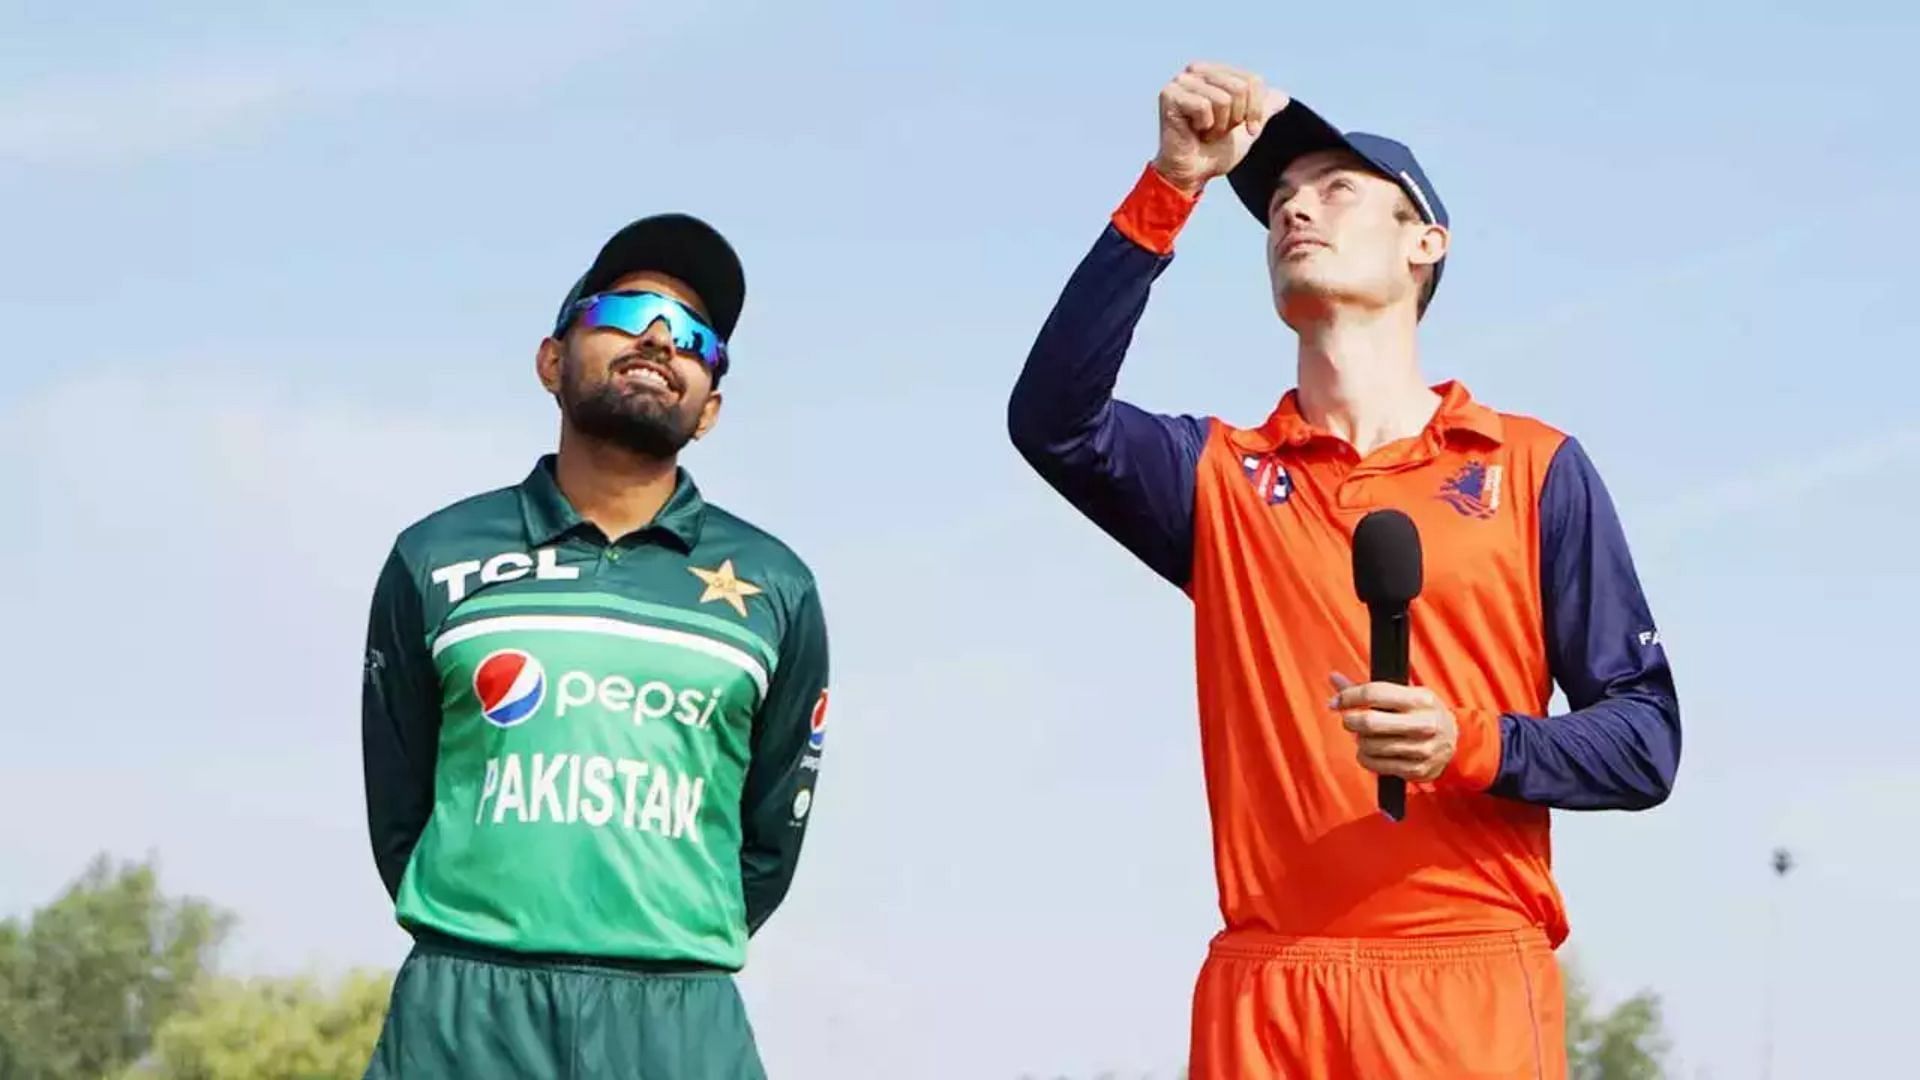 Will Pakistan get off to a winning start or will the Netherlands cause an upset?